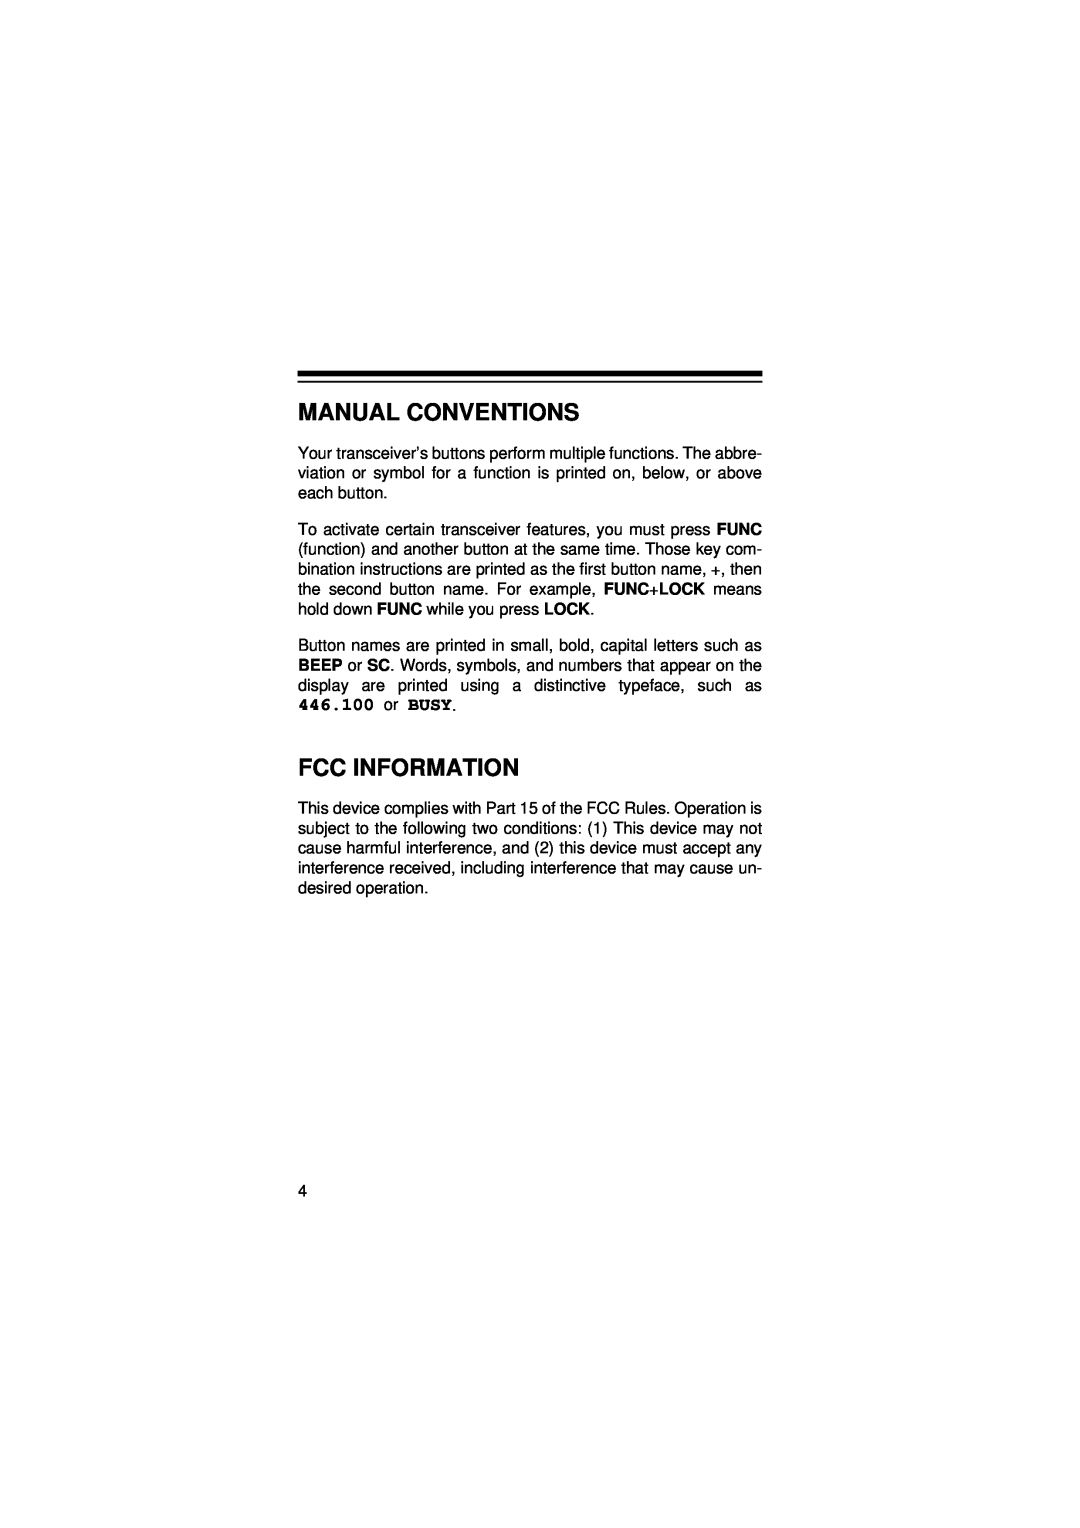 Radio Shack HTX-400 owner manual Manual Conventions, Fcc Information 